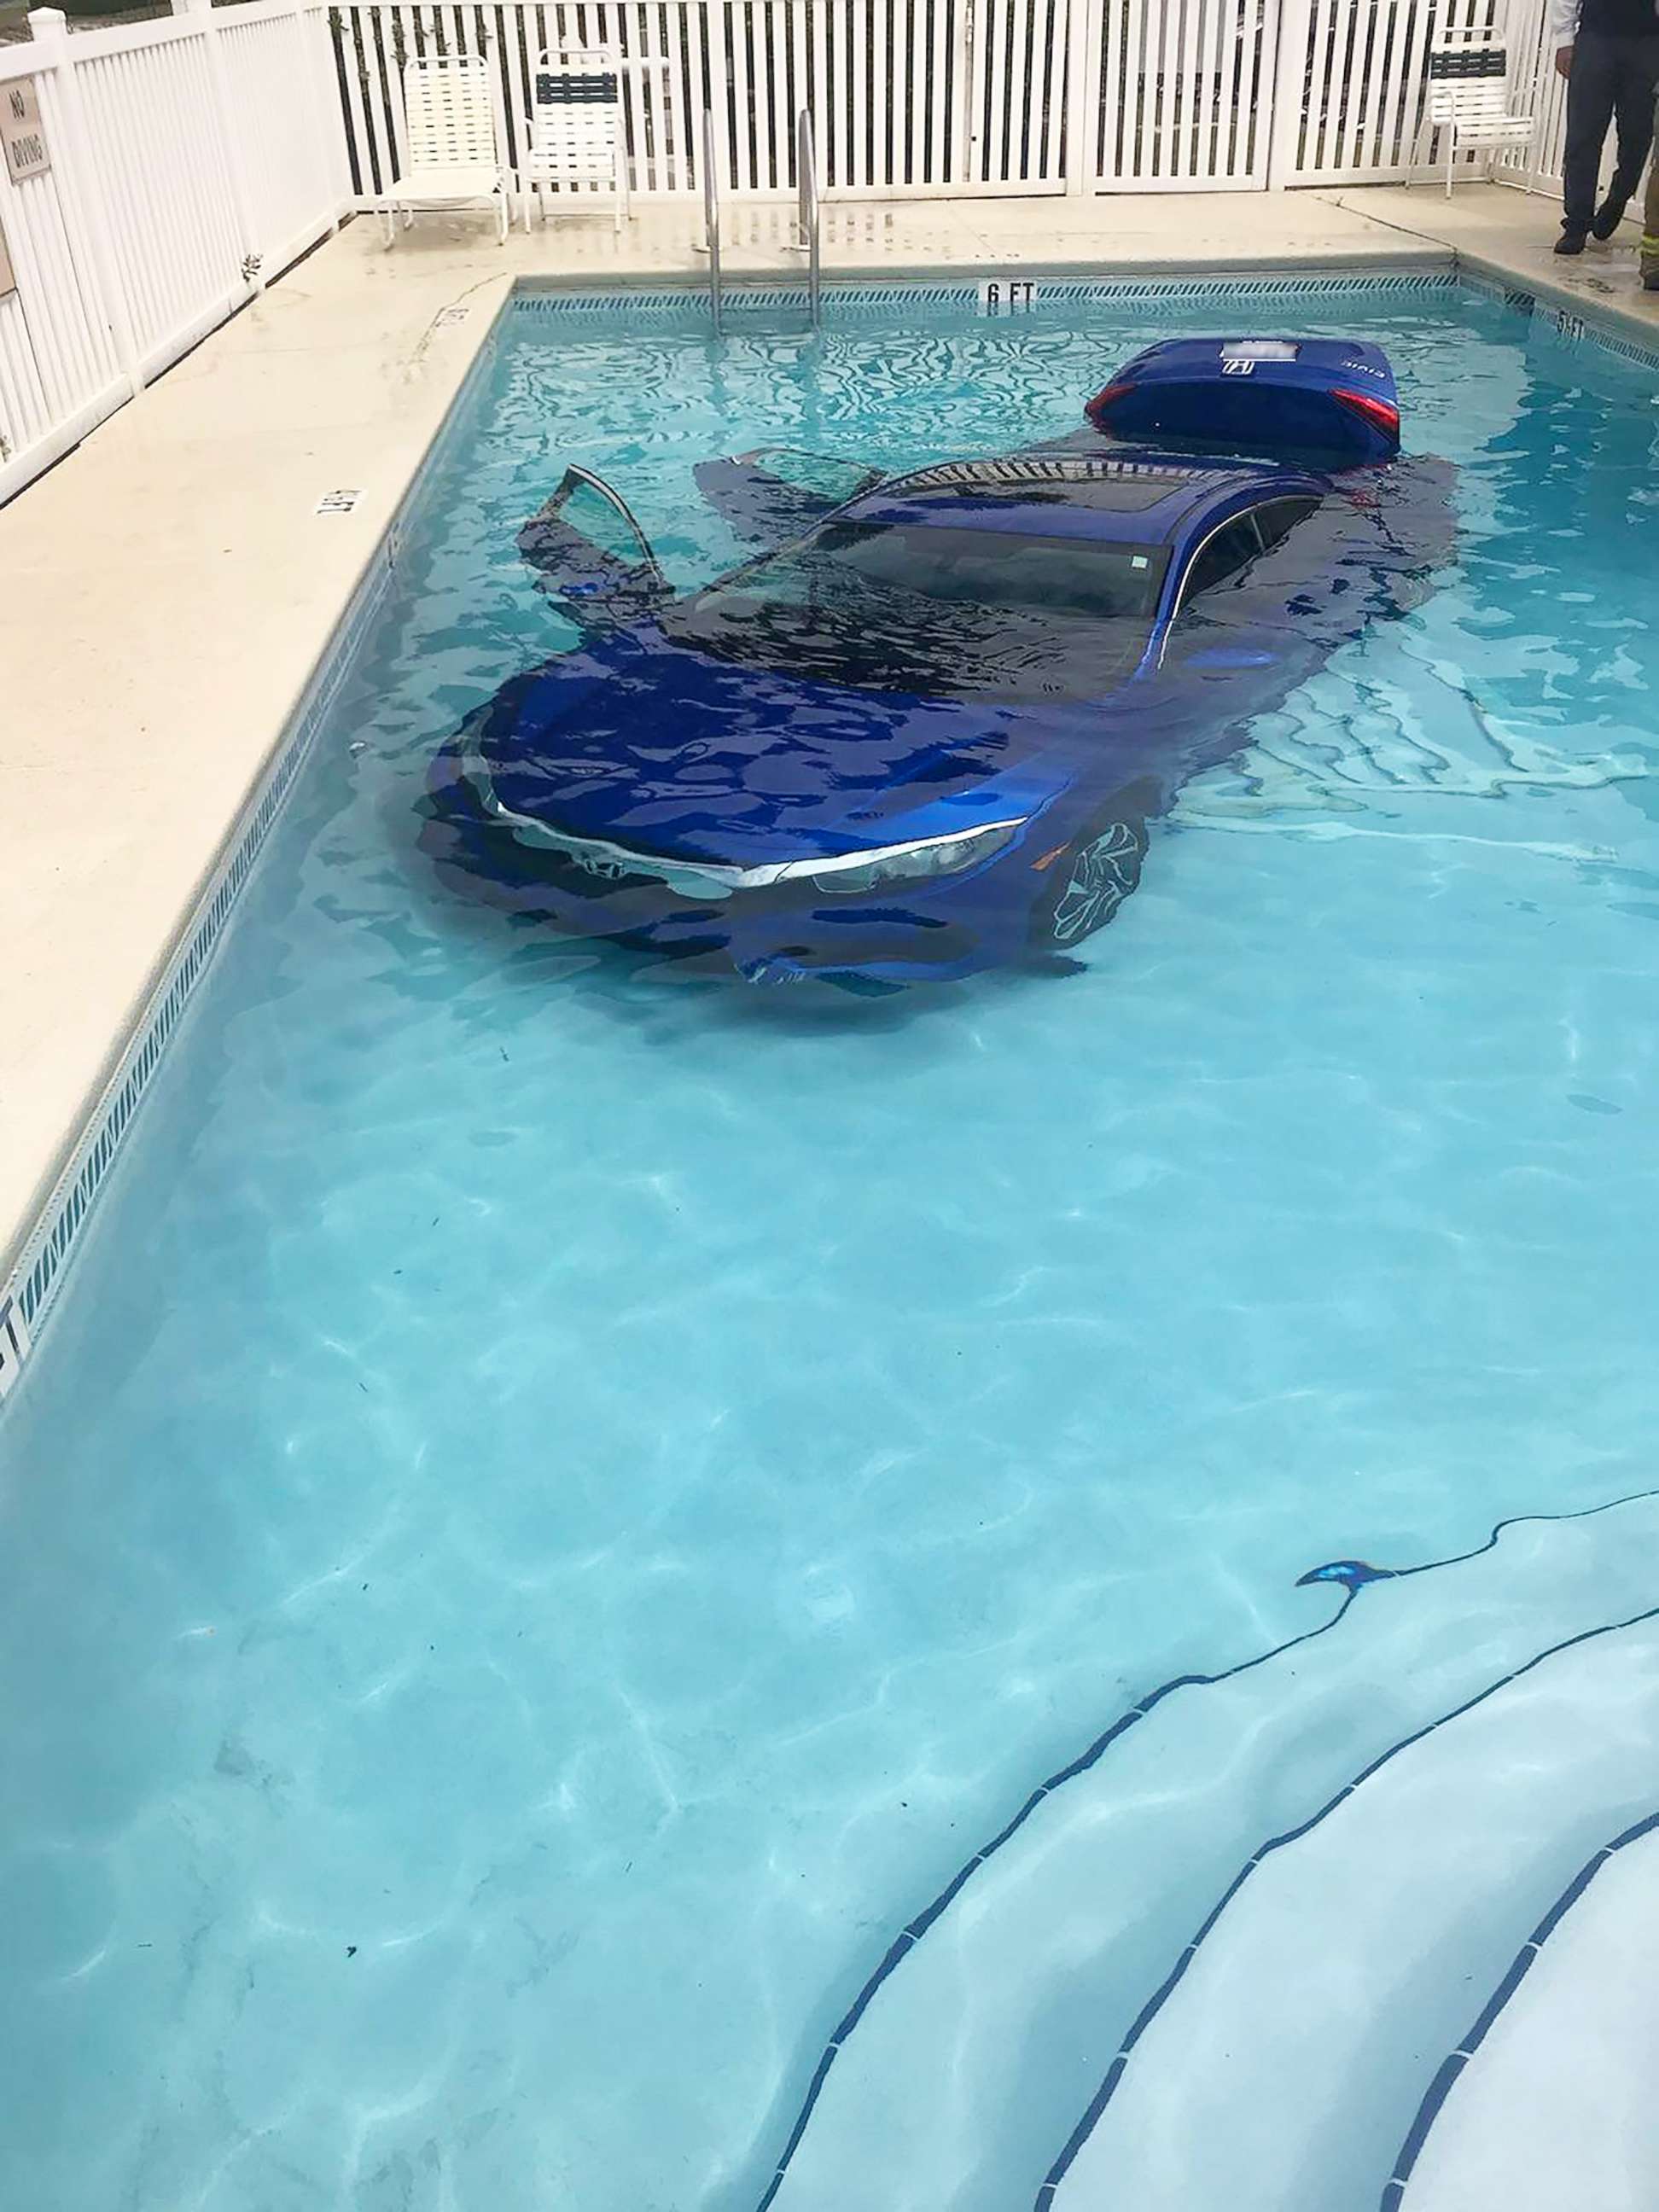 PHOTO: A car sits in a pool on Okaloosa Island, Fla., in this undated photo shared on Facebook by Okaloosa County Sheriff's Office.